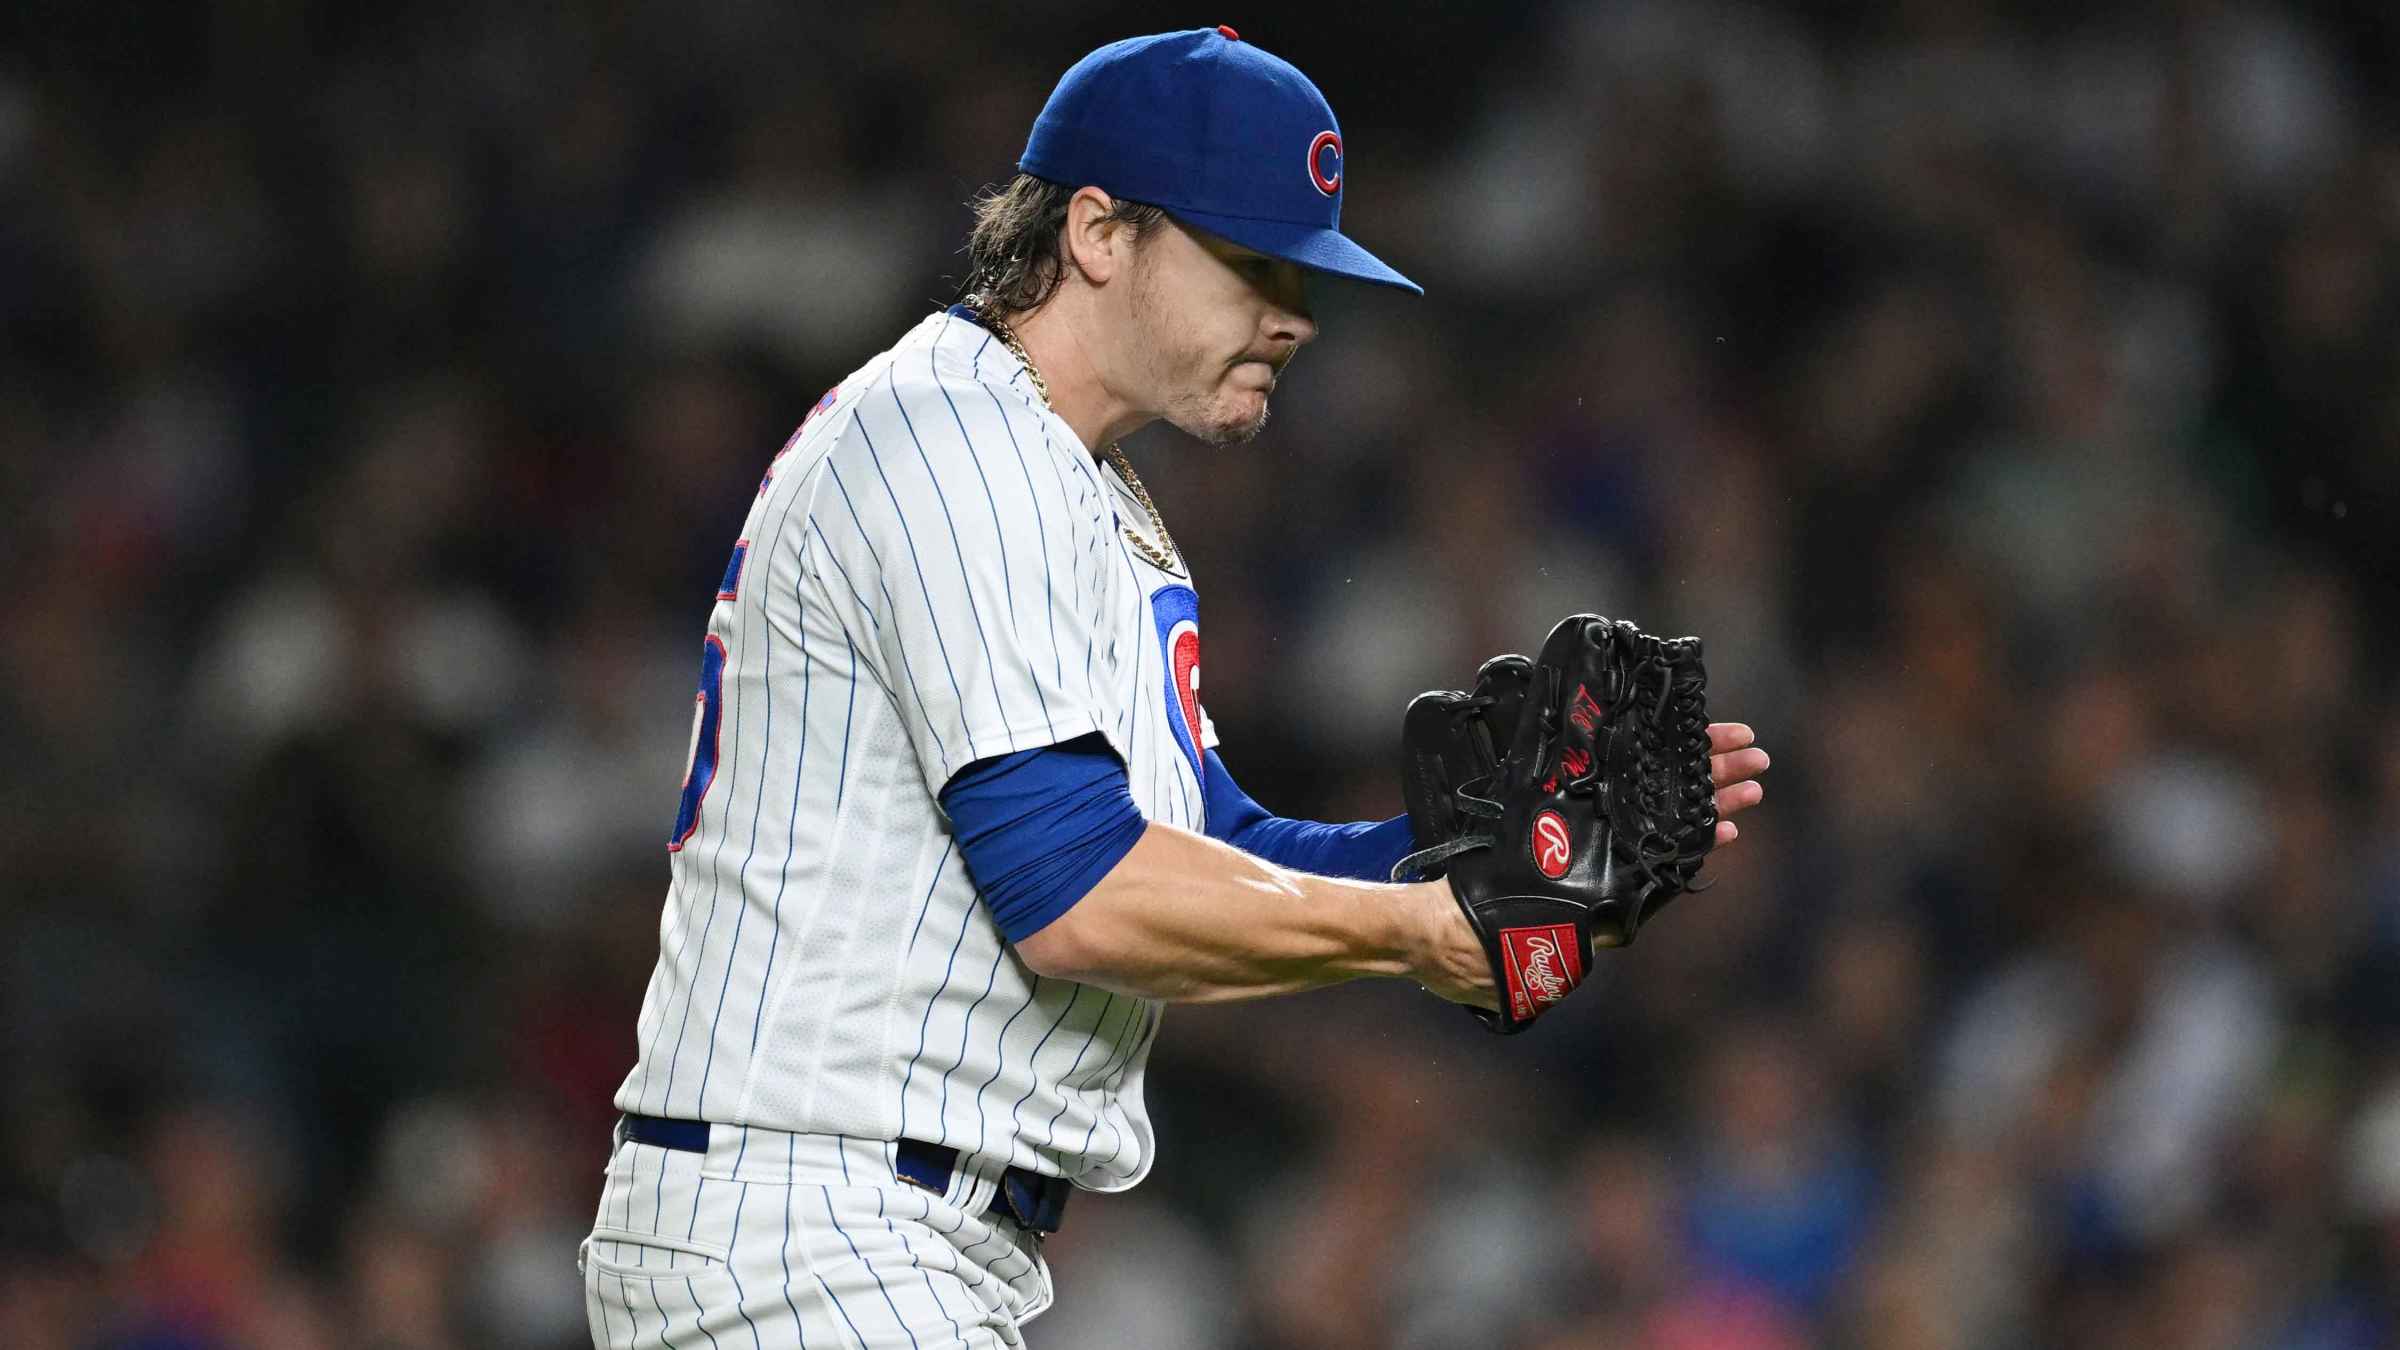 REKAP: ⚾️ Chicago Cubs 4-0 Opening Day Win Over the Milwaukee Brewers 